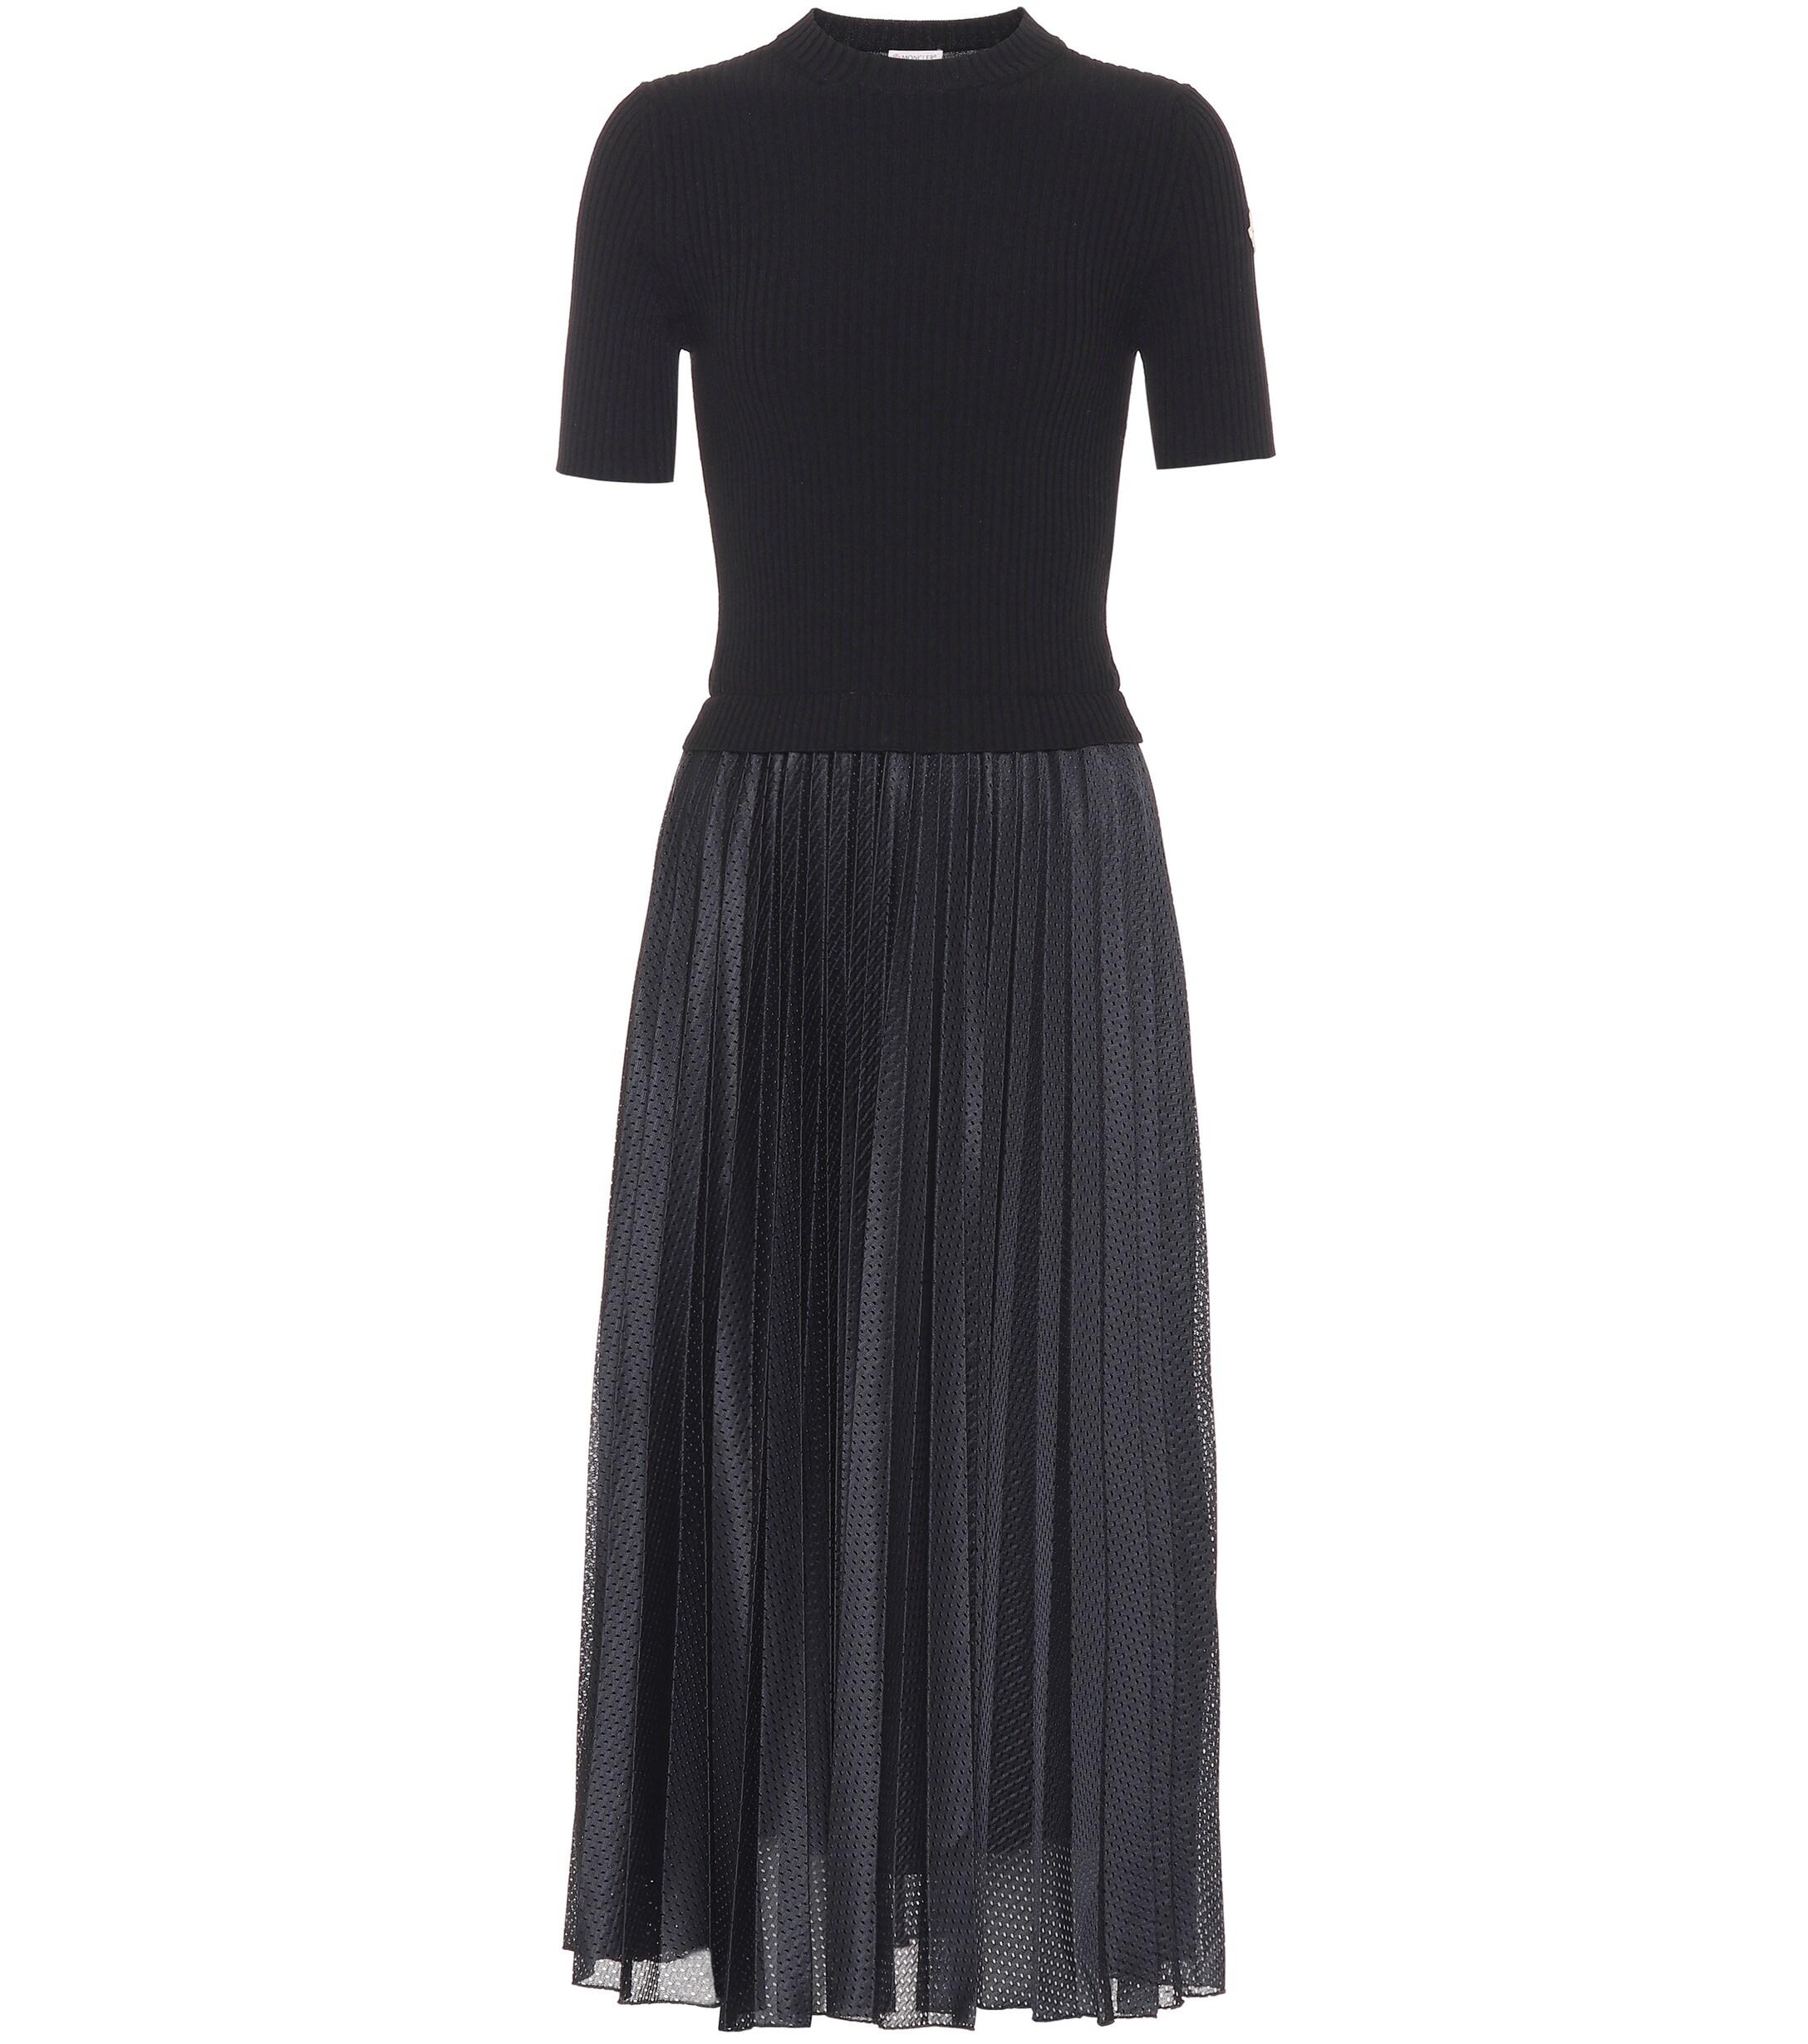 Moncler Wool And Mesh Midi Dress in Black - Lyst